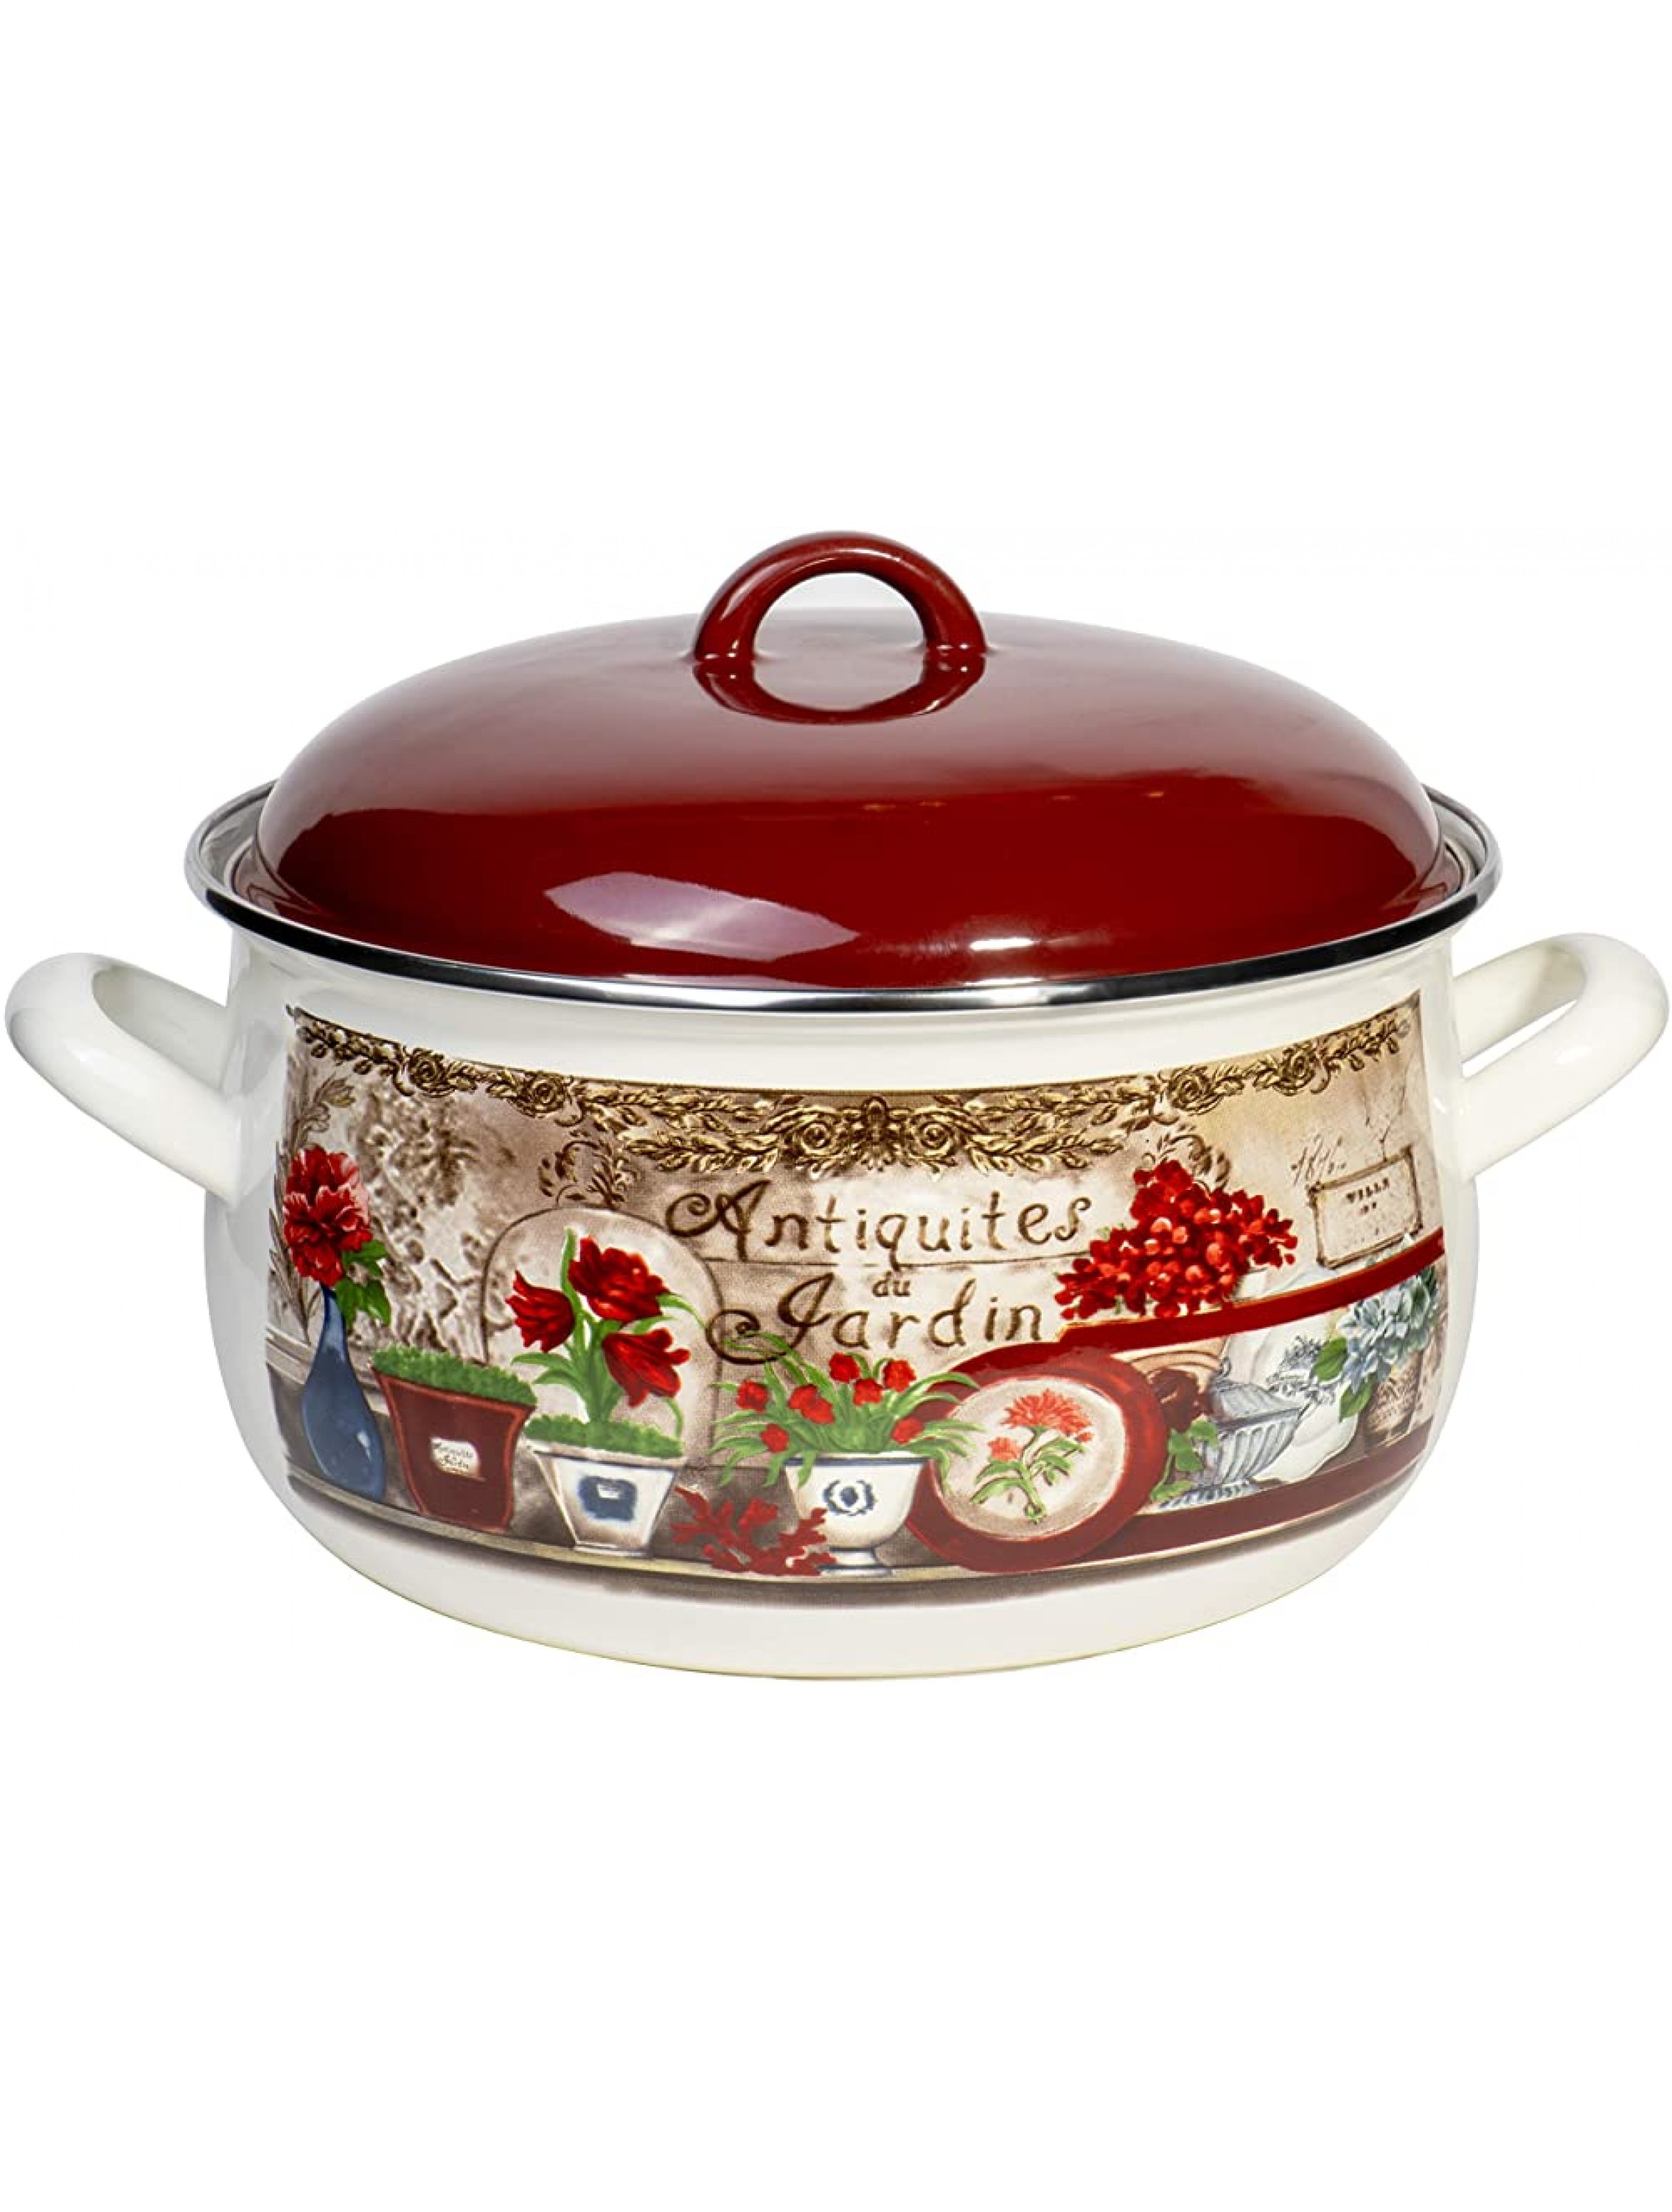 Enamel On Steel Round Covered Stockpot Pasta Stock Stew Soup Casserole Dish Cooking Pot with Lid Up to 6.5 Quarts 24 cm - BTIXPWP7E